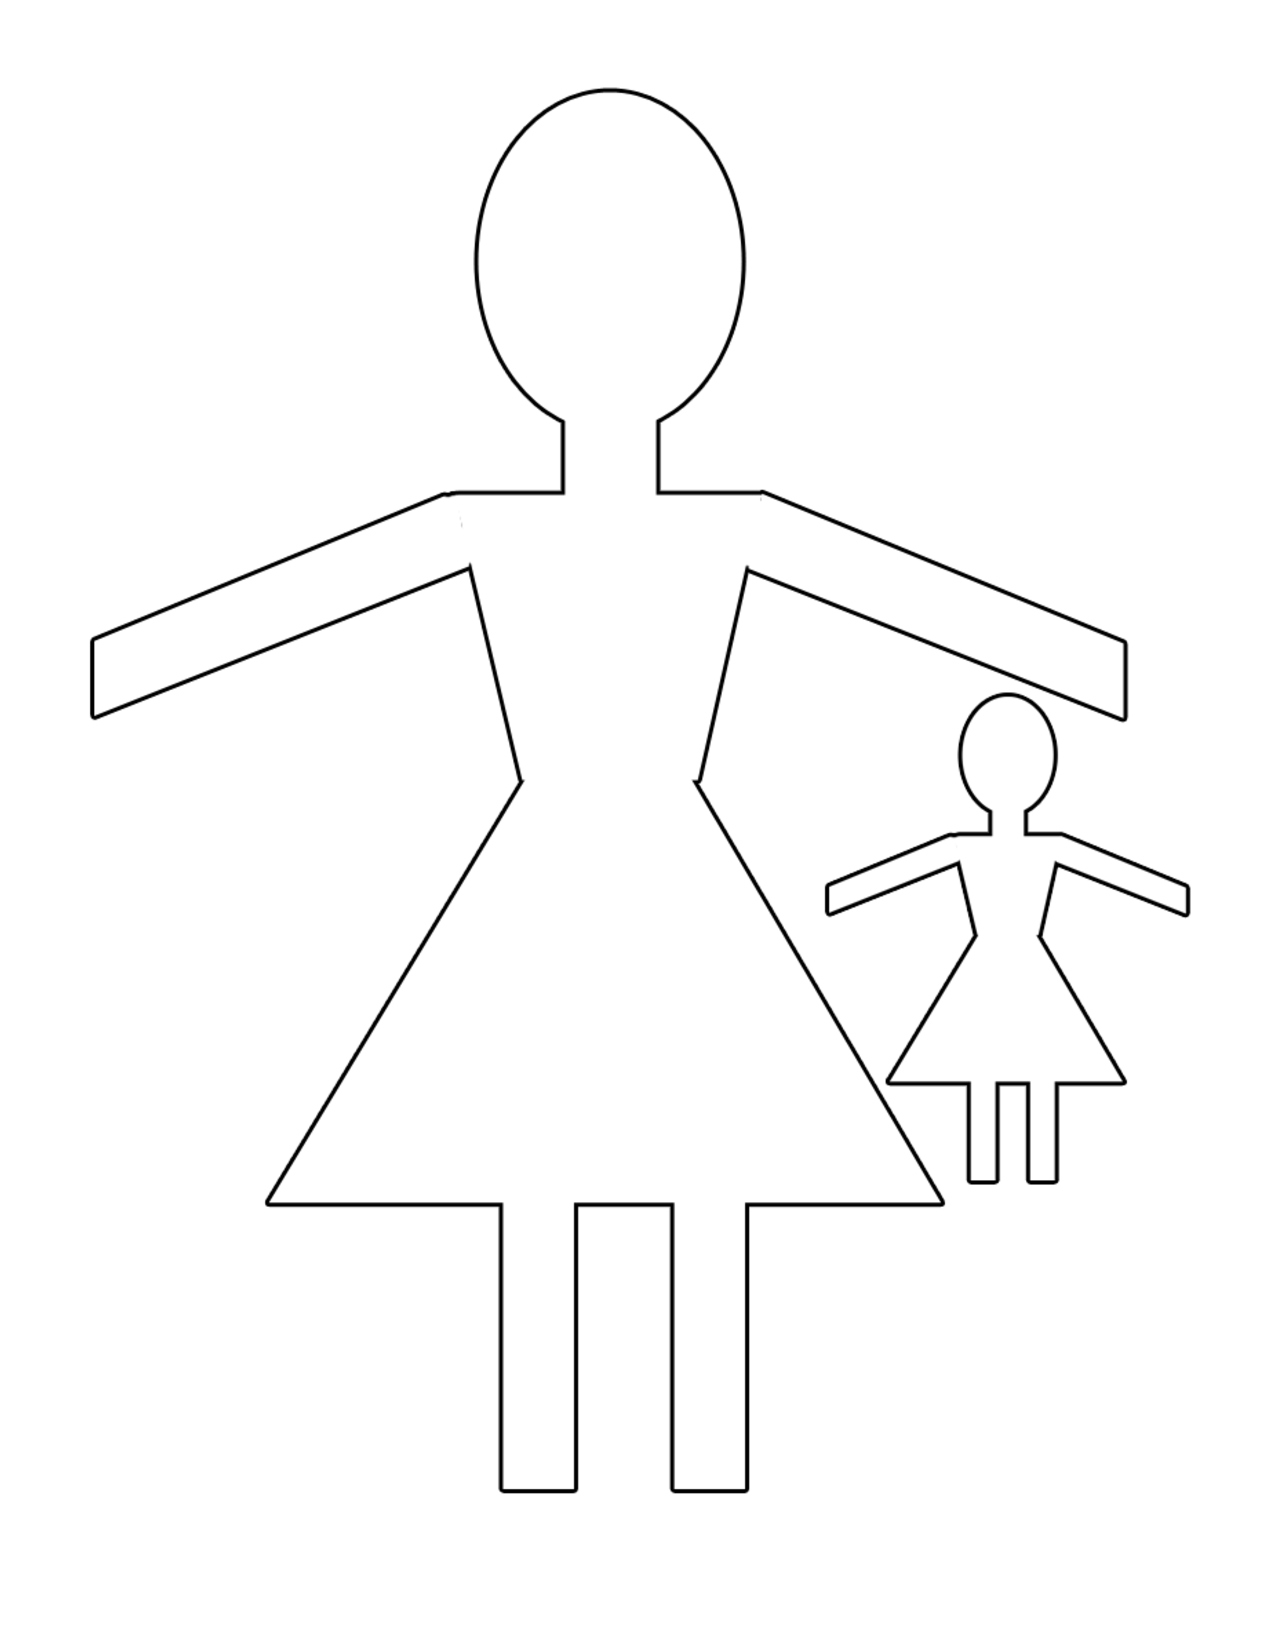 7-best-images-of-printable-cut-out-dolls-coloring-paper-dolls-black-printable-paper-dolls-and